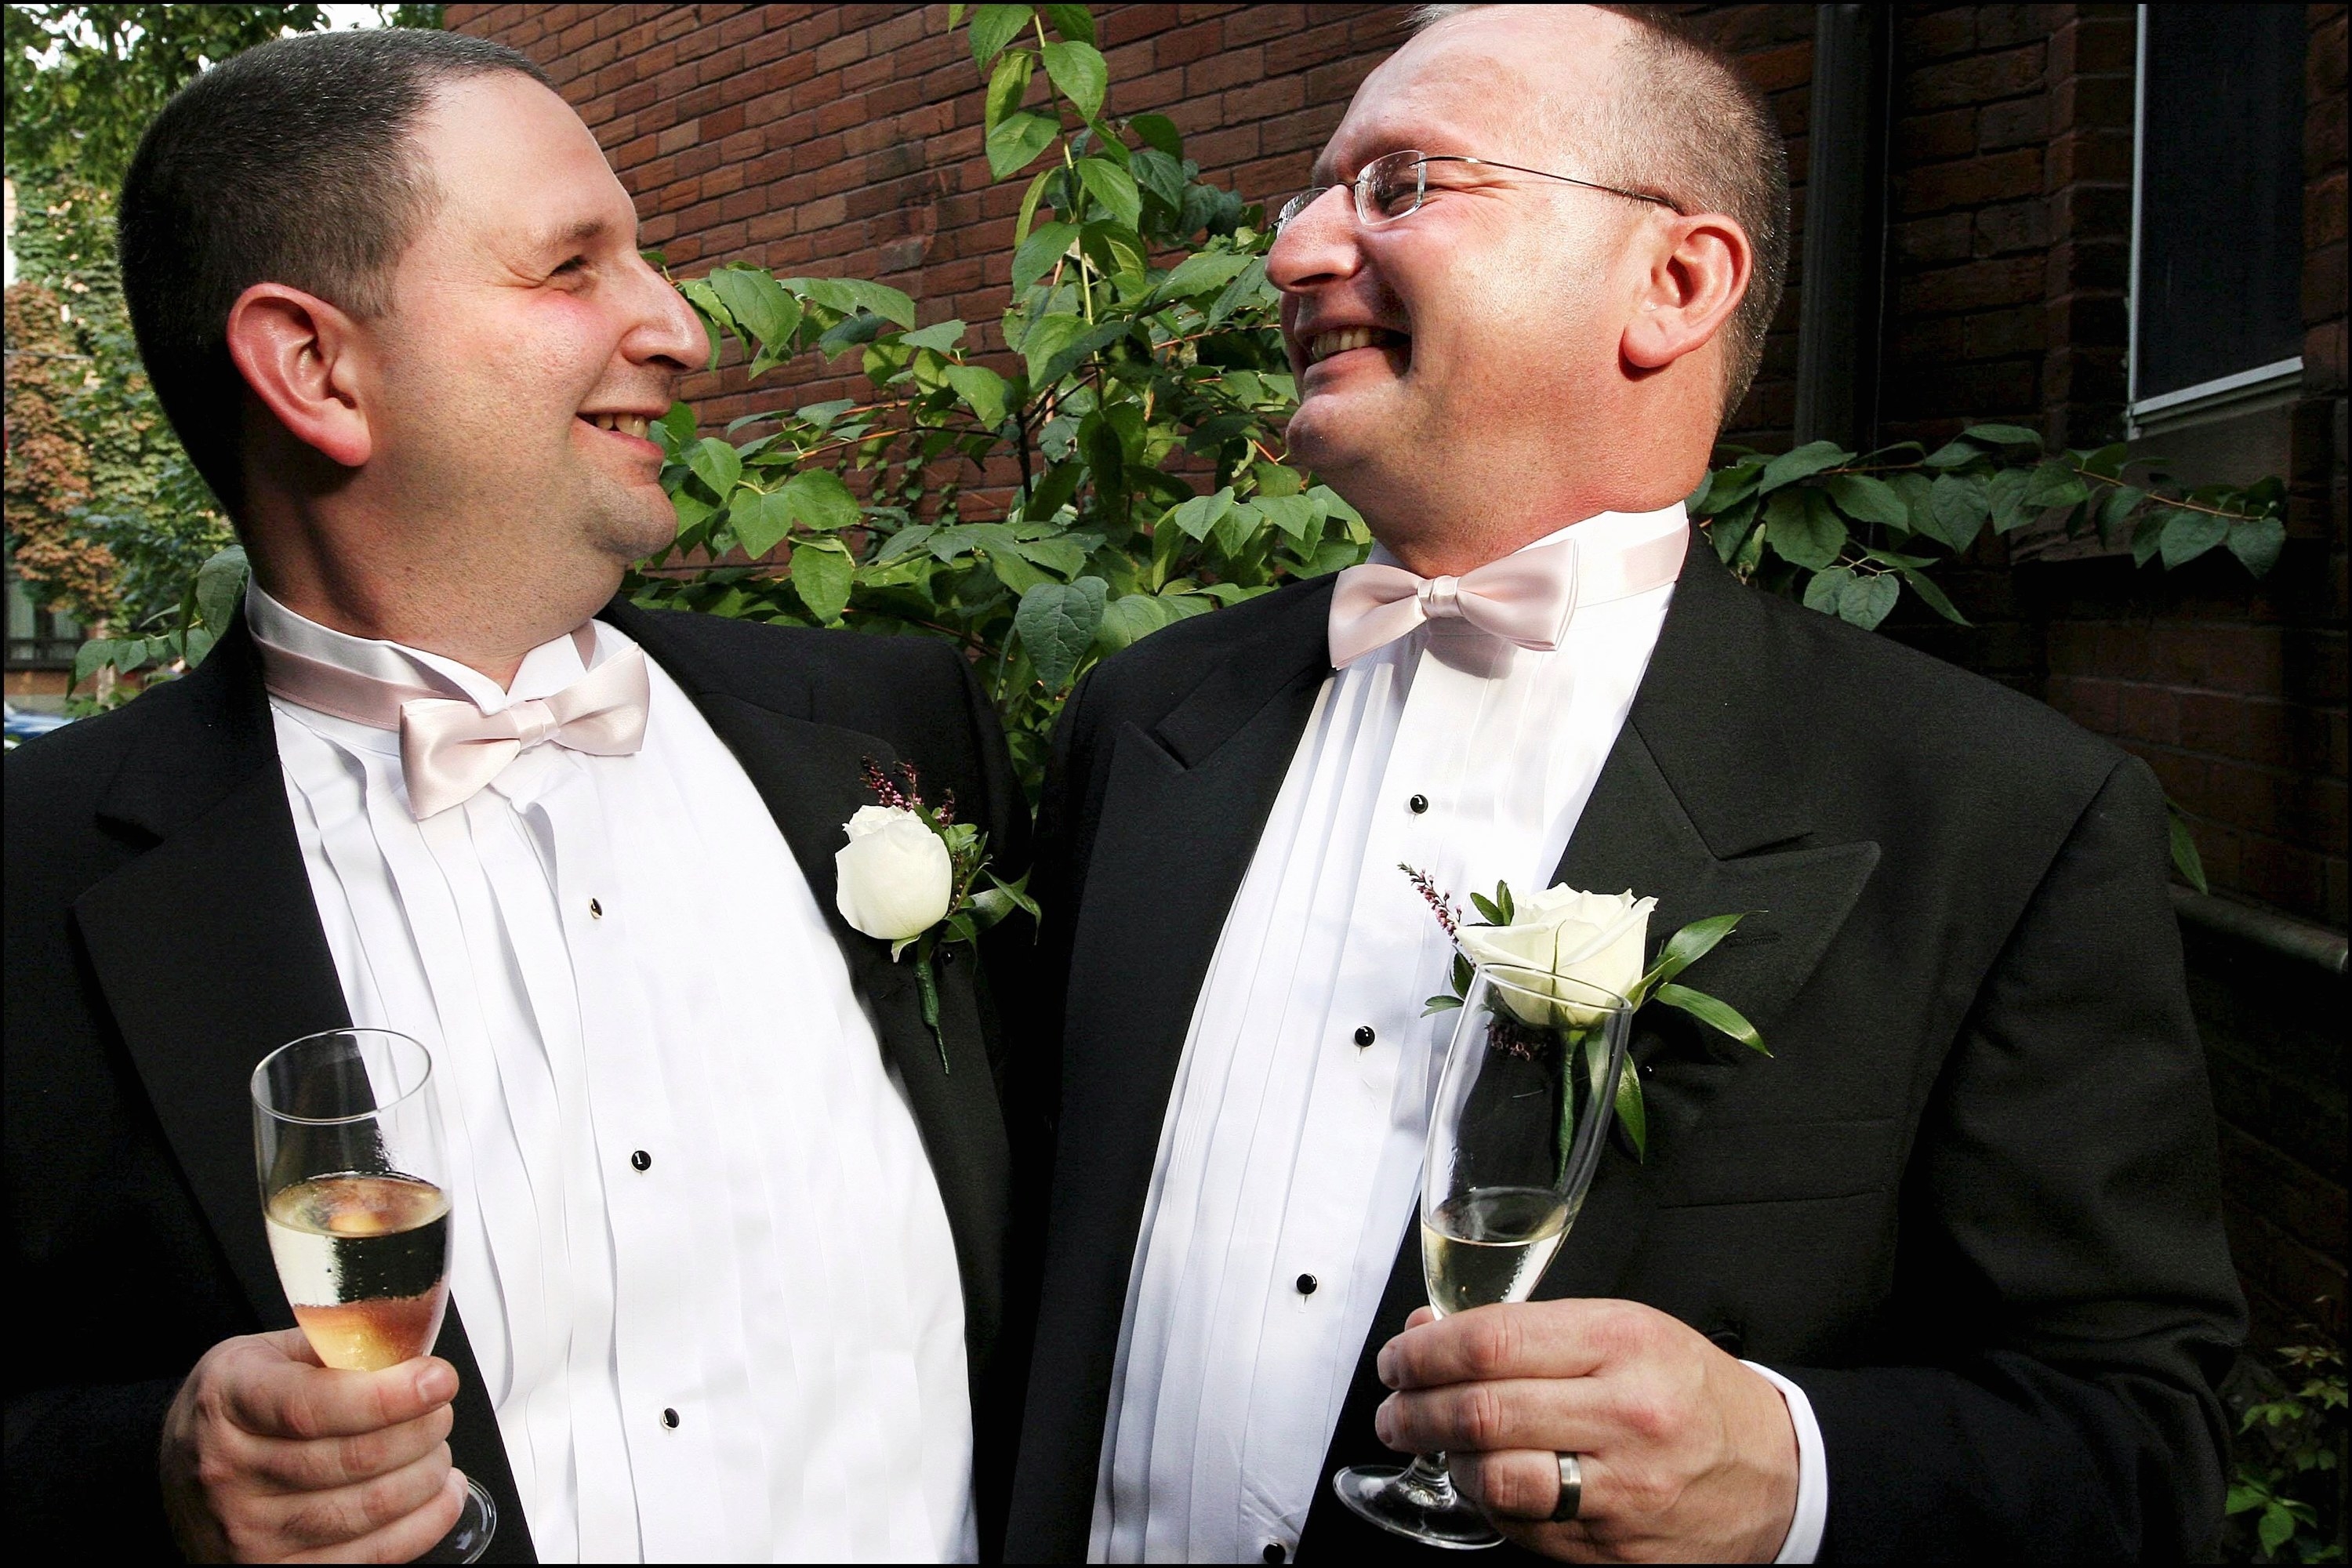 A gay couple on their wedding day in Toronto